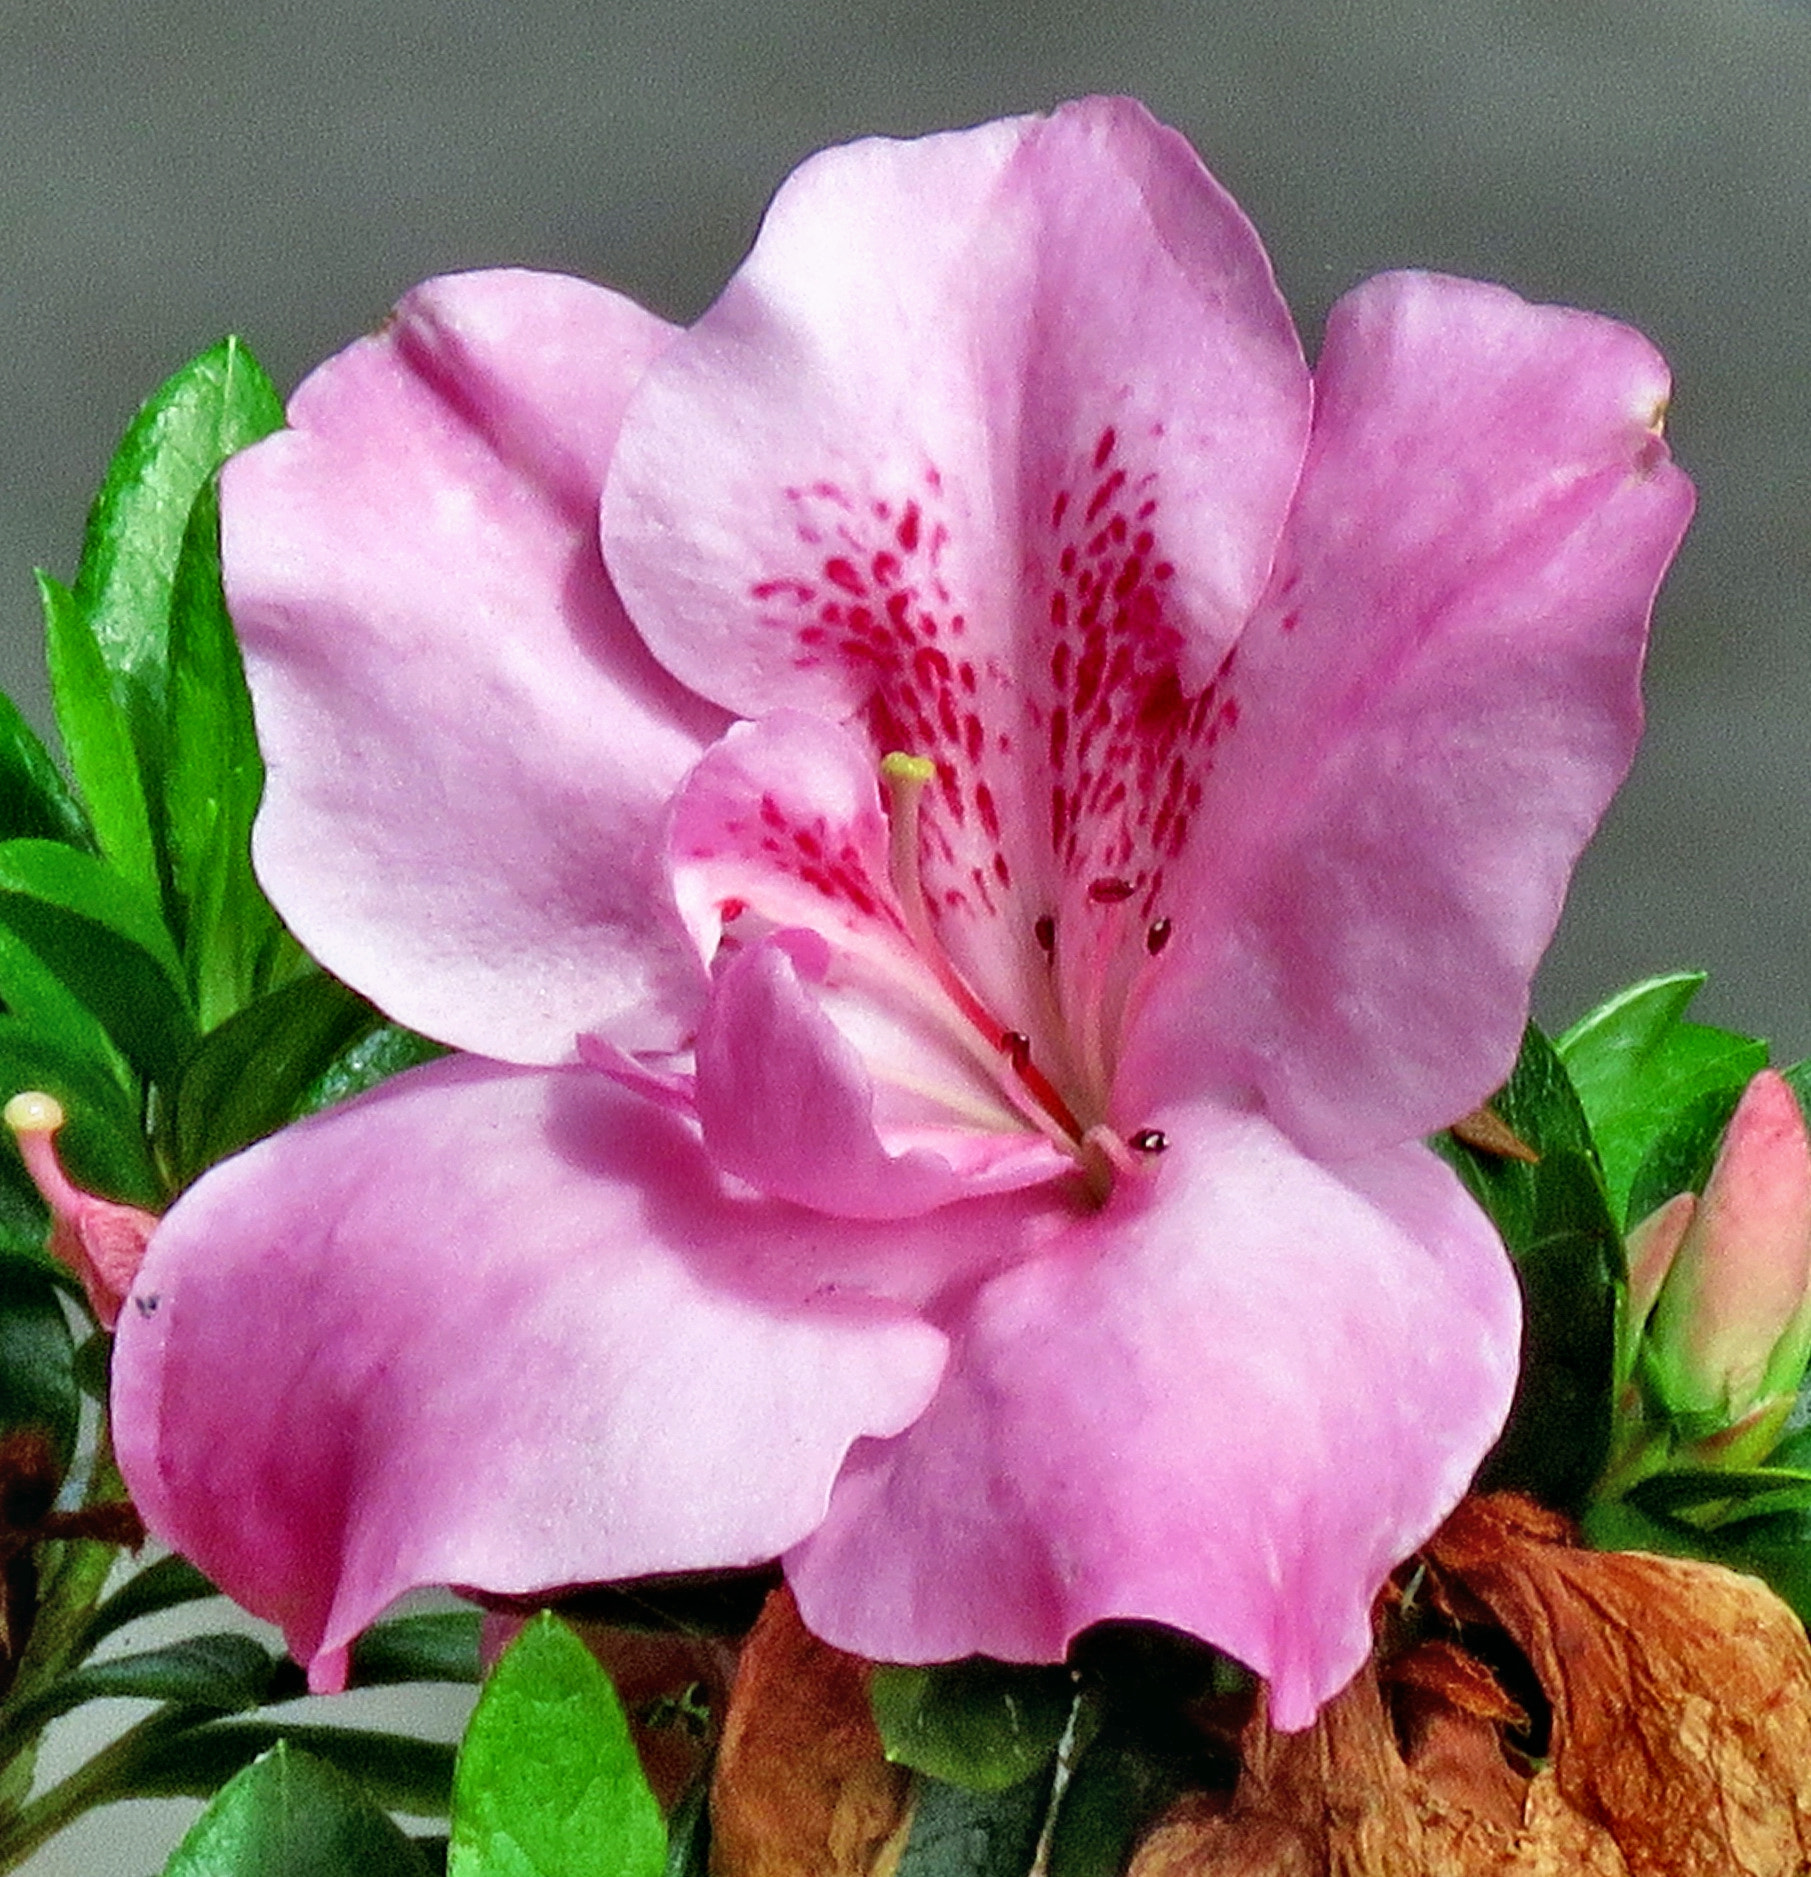 3.8 - 247.0 mm sample photo. A nice pink and purple flower photography